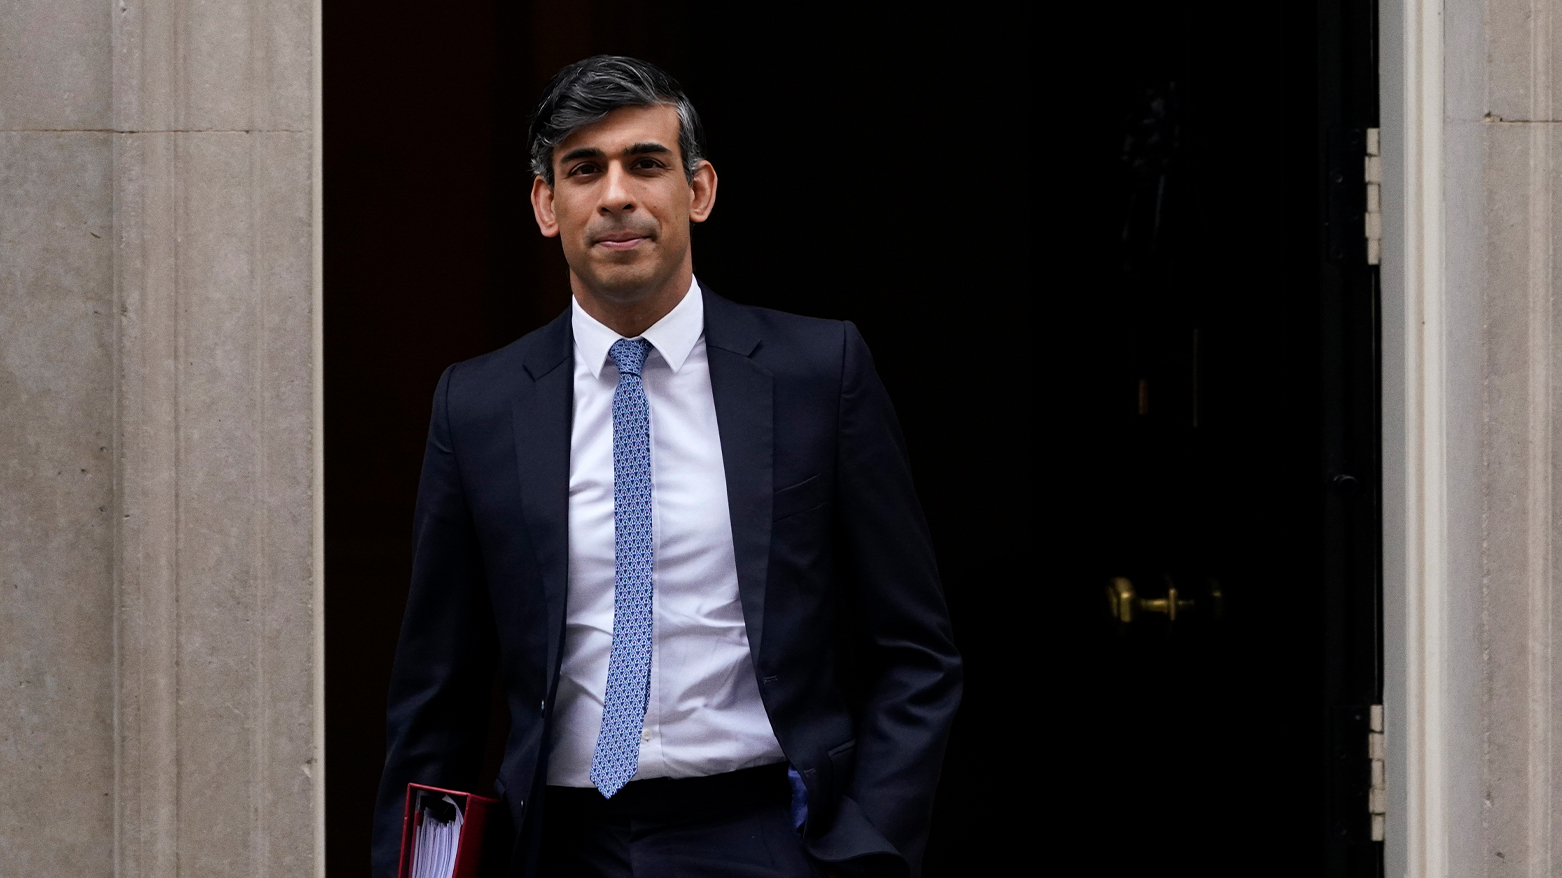 Britain's Prime Minster Rishi Sunak departs 10 Downing Street to go to the House of Commons for his weekly Prime Minister's Questions in London, Wednesday, March 13, 2024. (AP Photo/Alberto Pezzali)